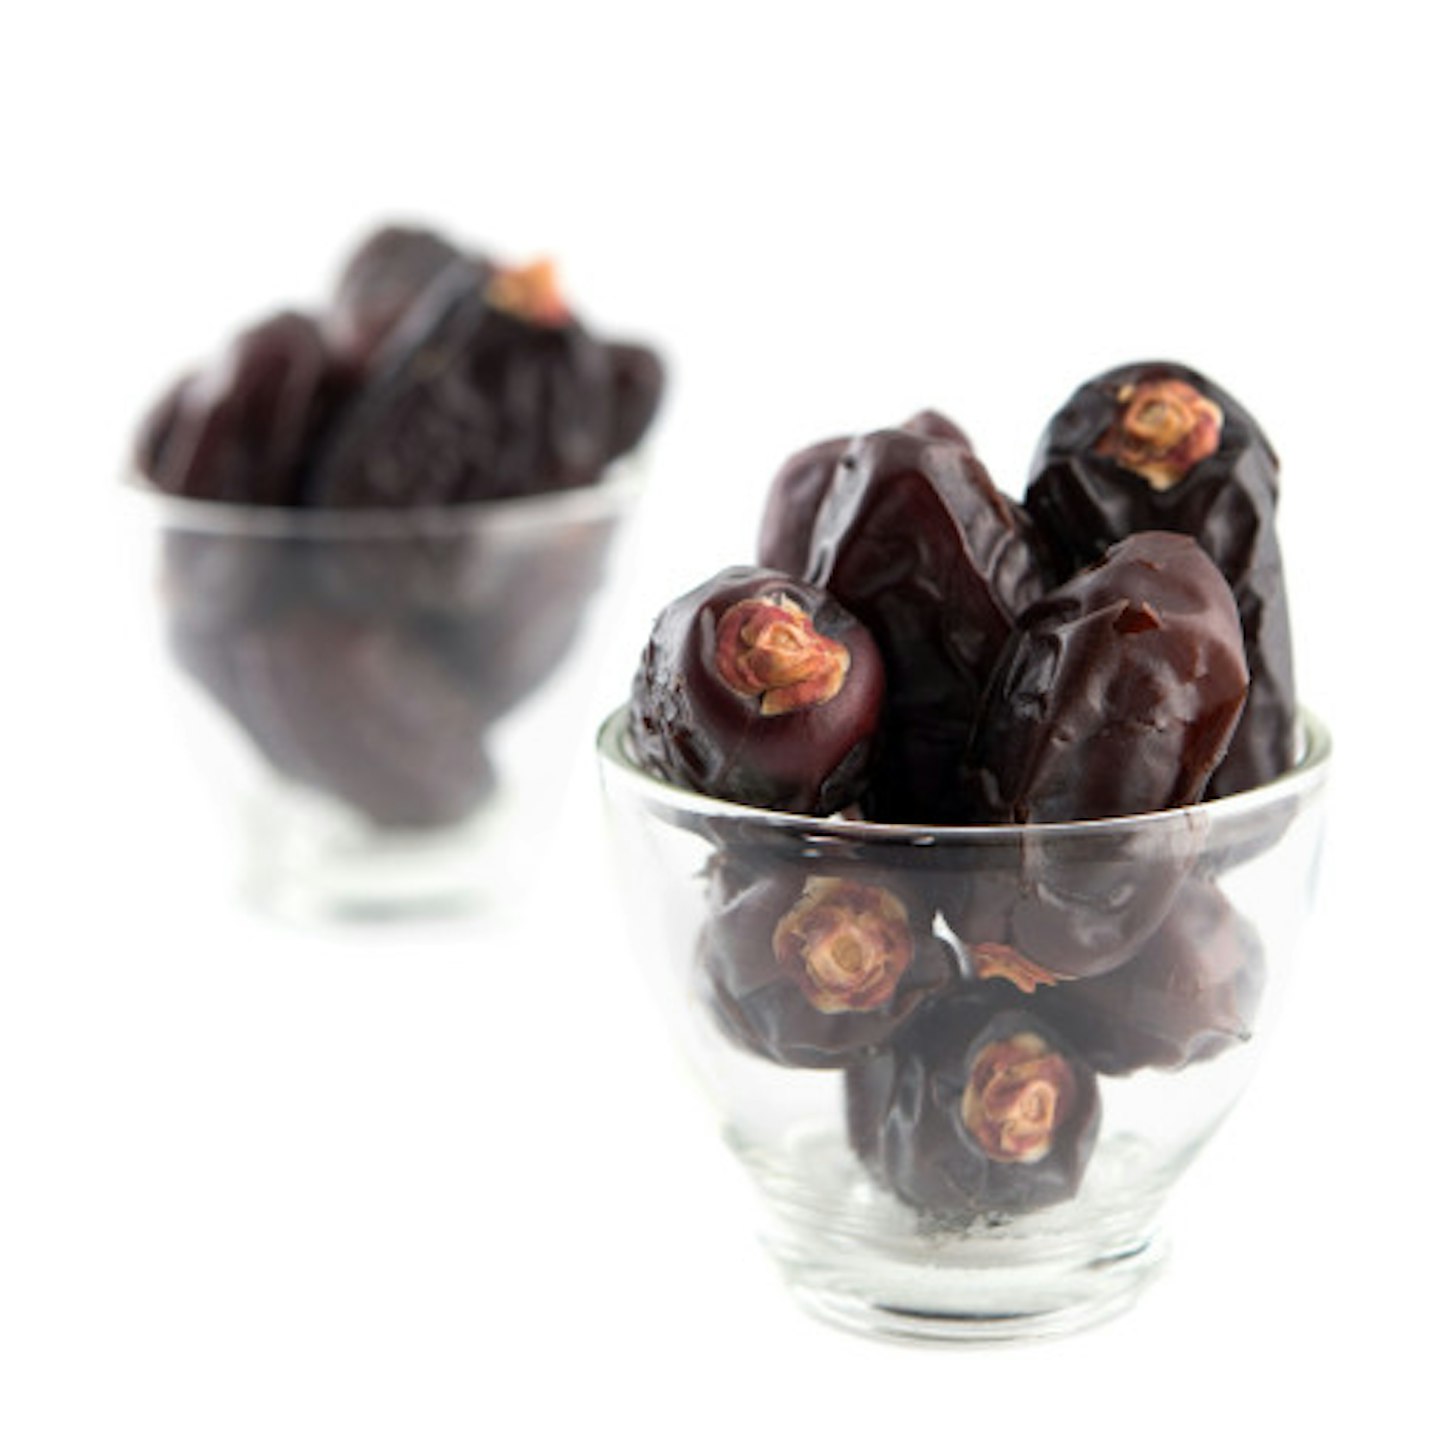 It is traditional to break your fast with dates.